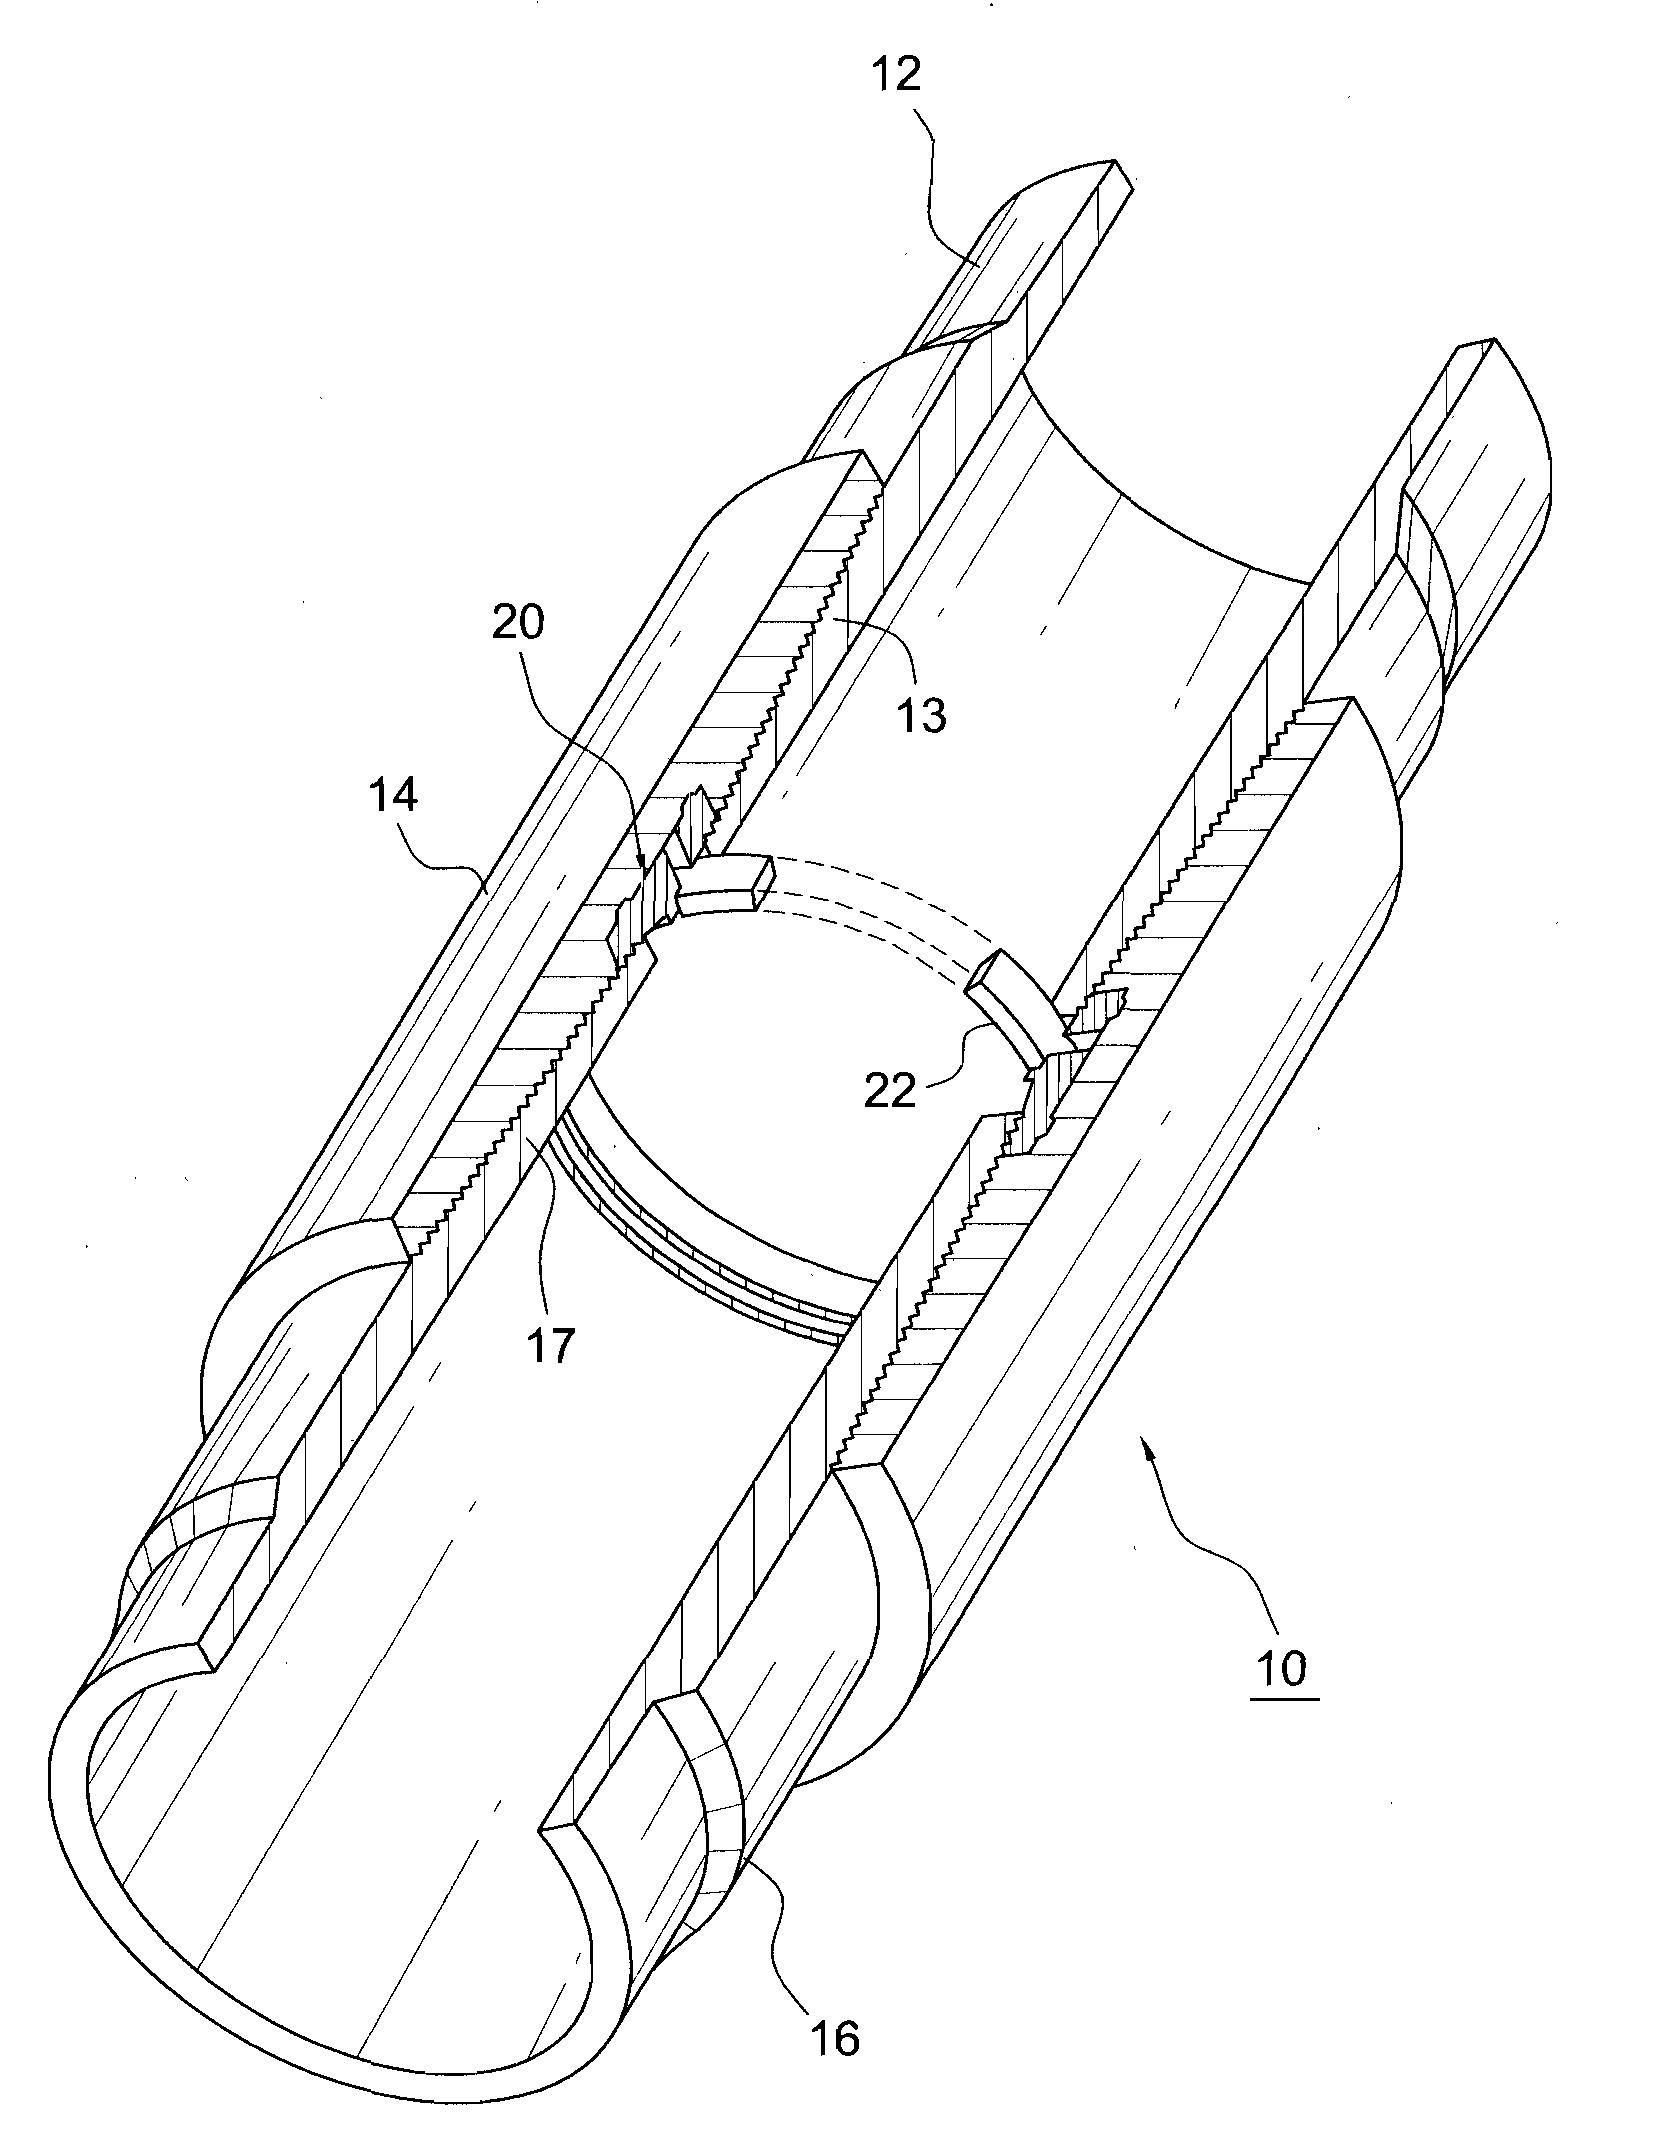 System and method for sealing couplings in downhole tubing strings